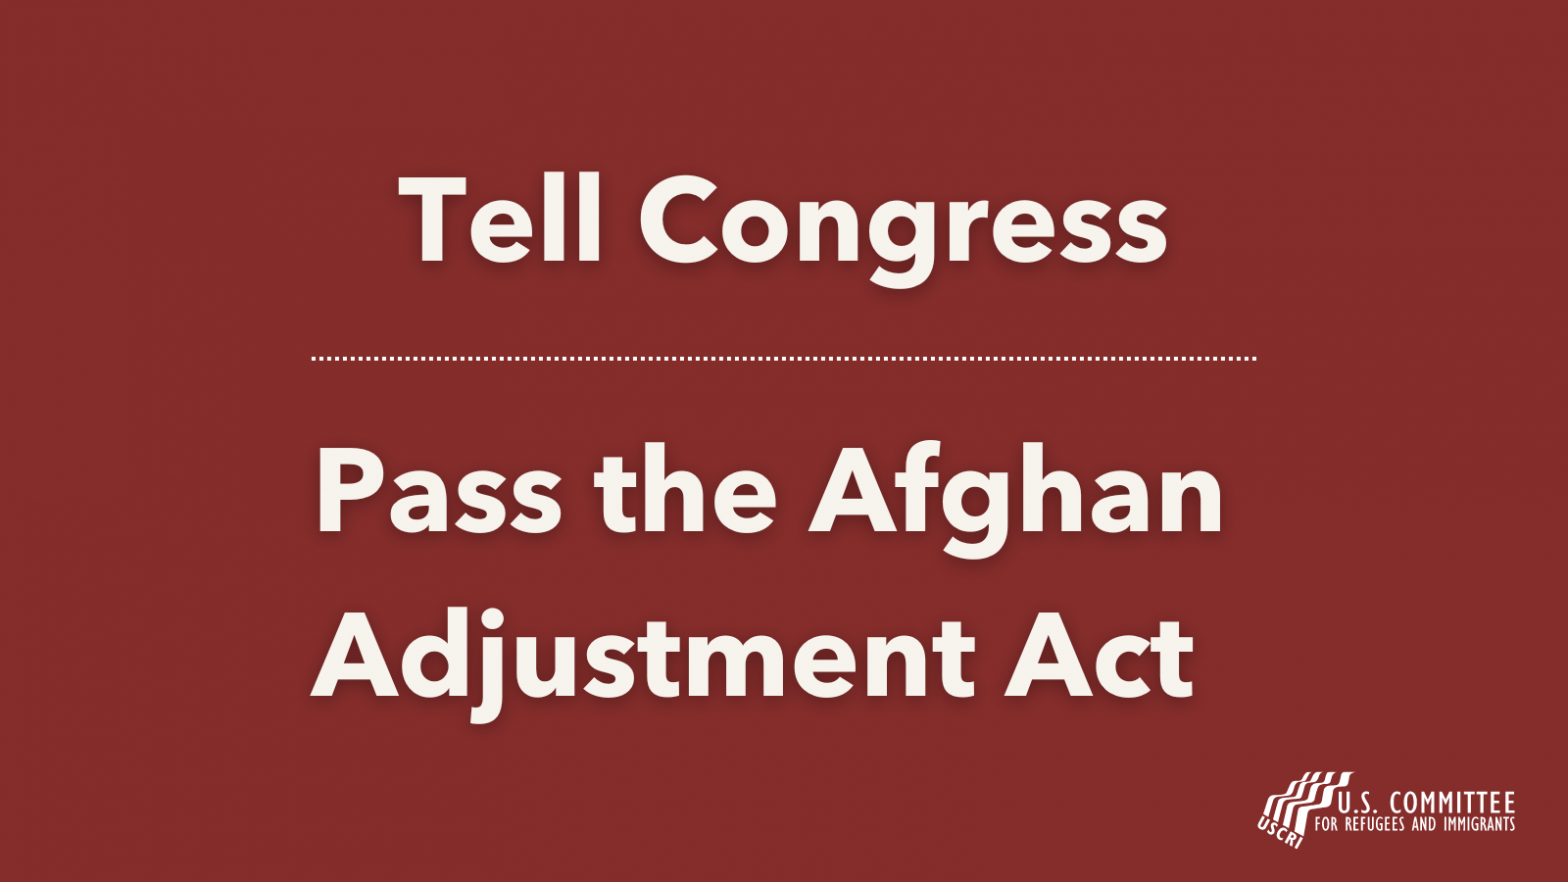 Take Action: Support the Afghan Adjustment Act